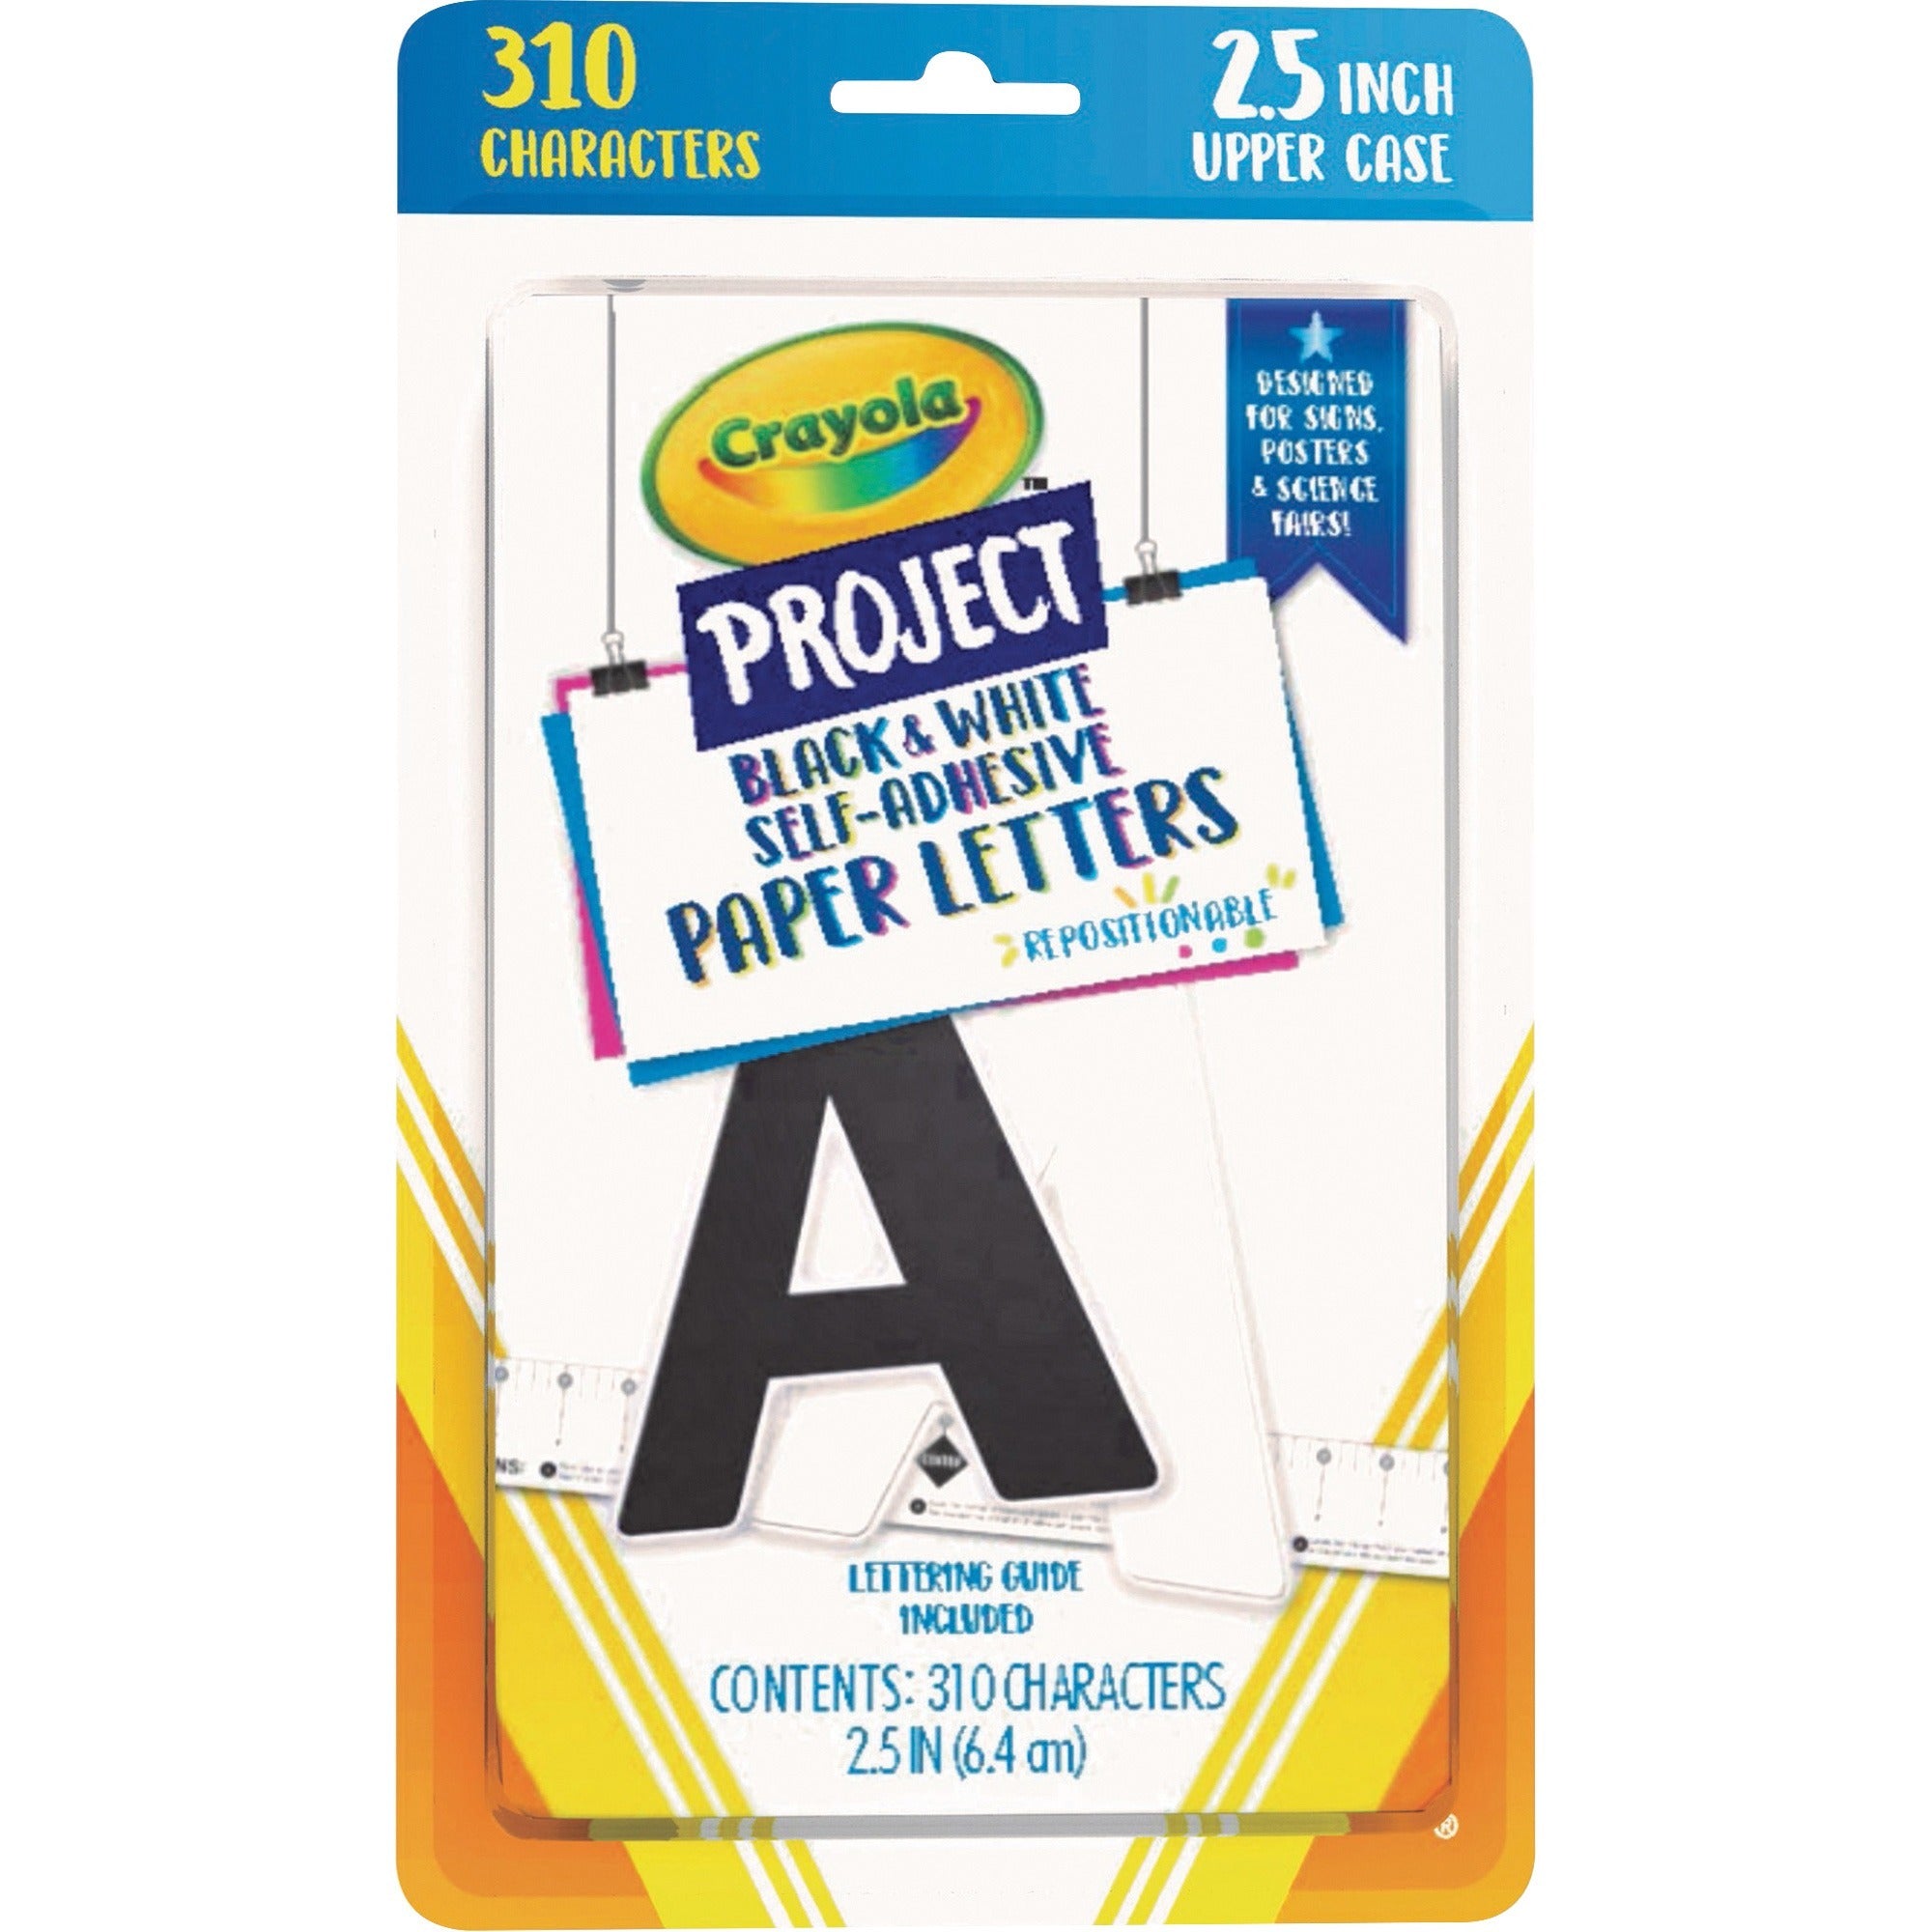 crayola-self-adhesive-paper-letters-self-adhesive-250-height-black-white-paper-310-pack_pacp1645cra - 1